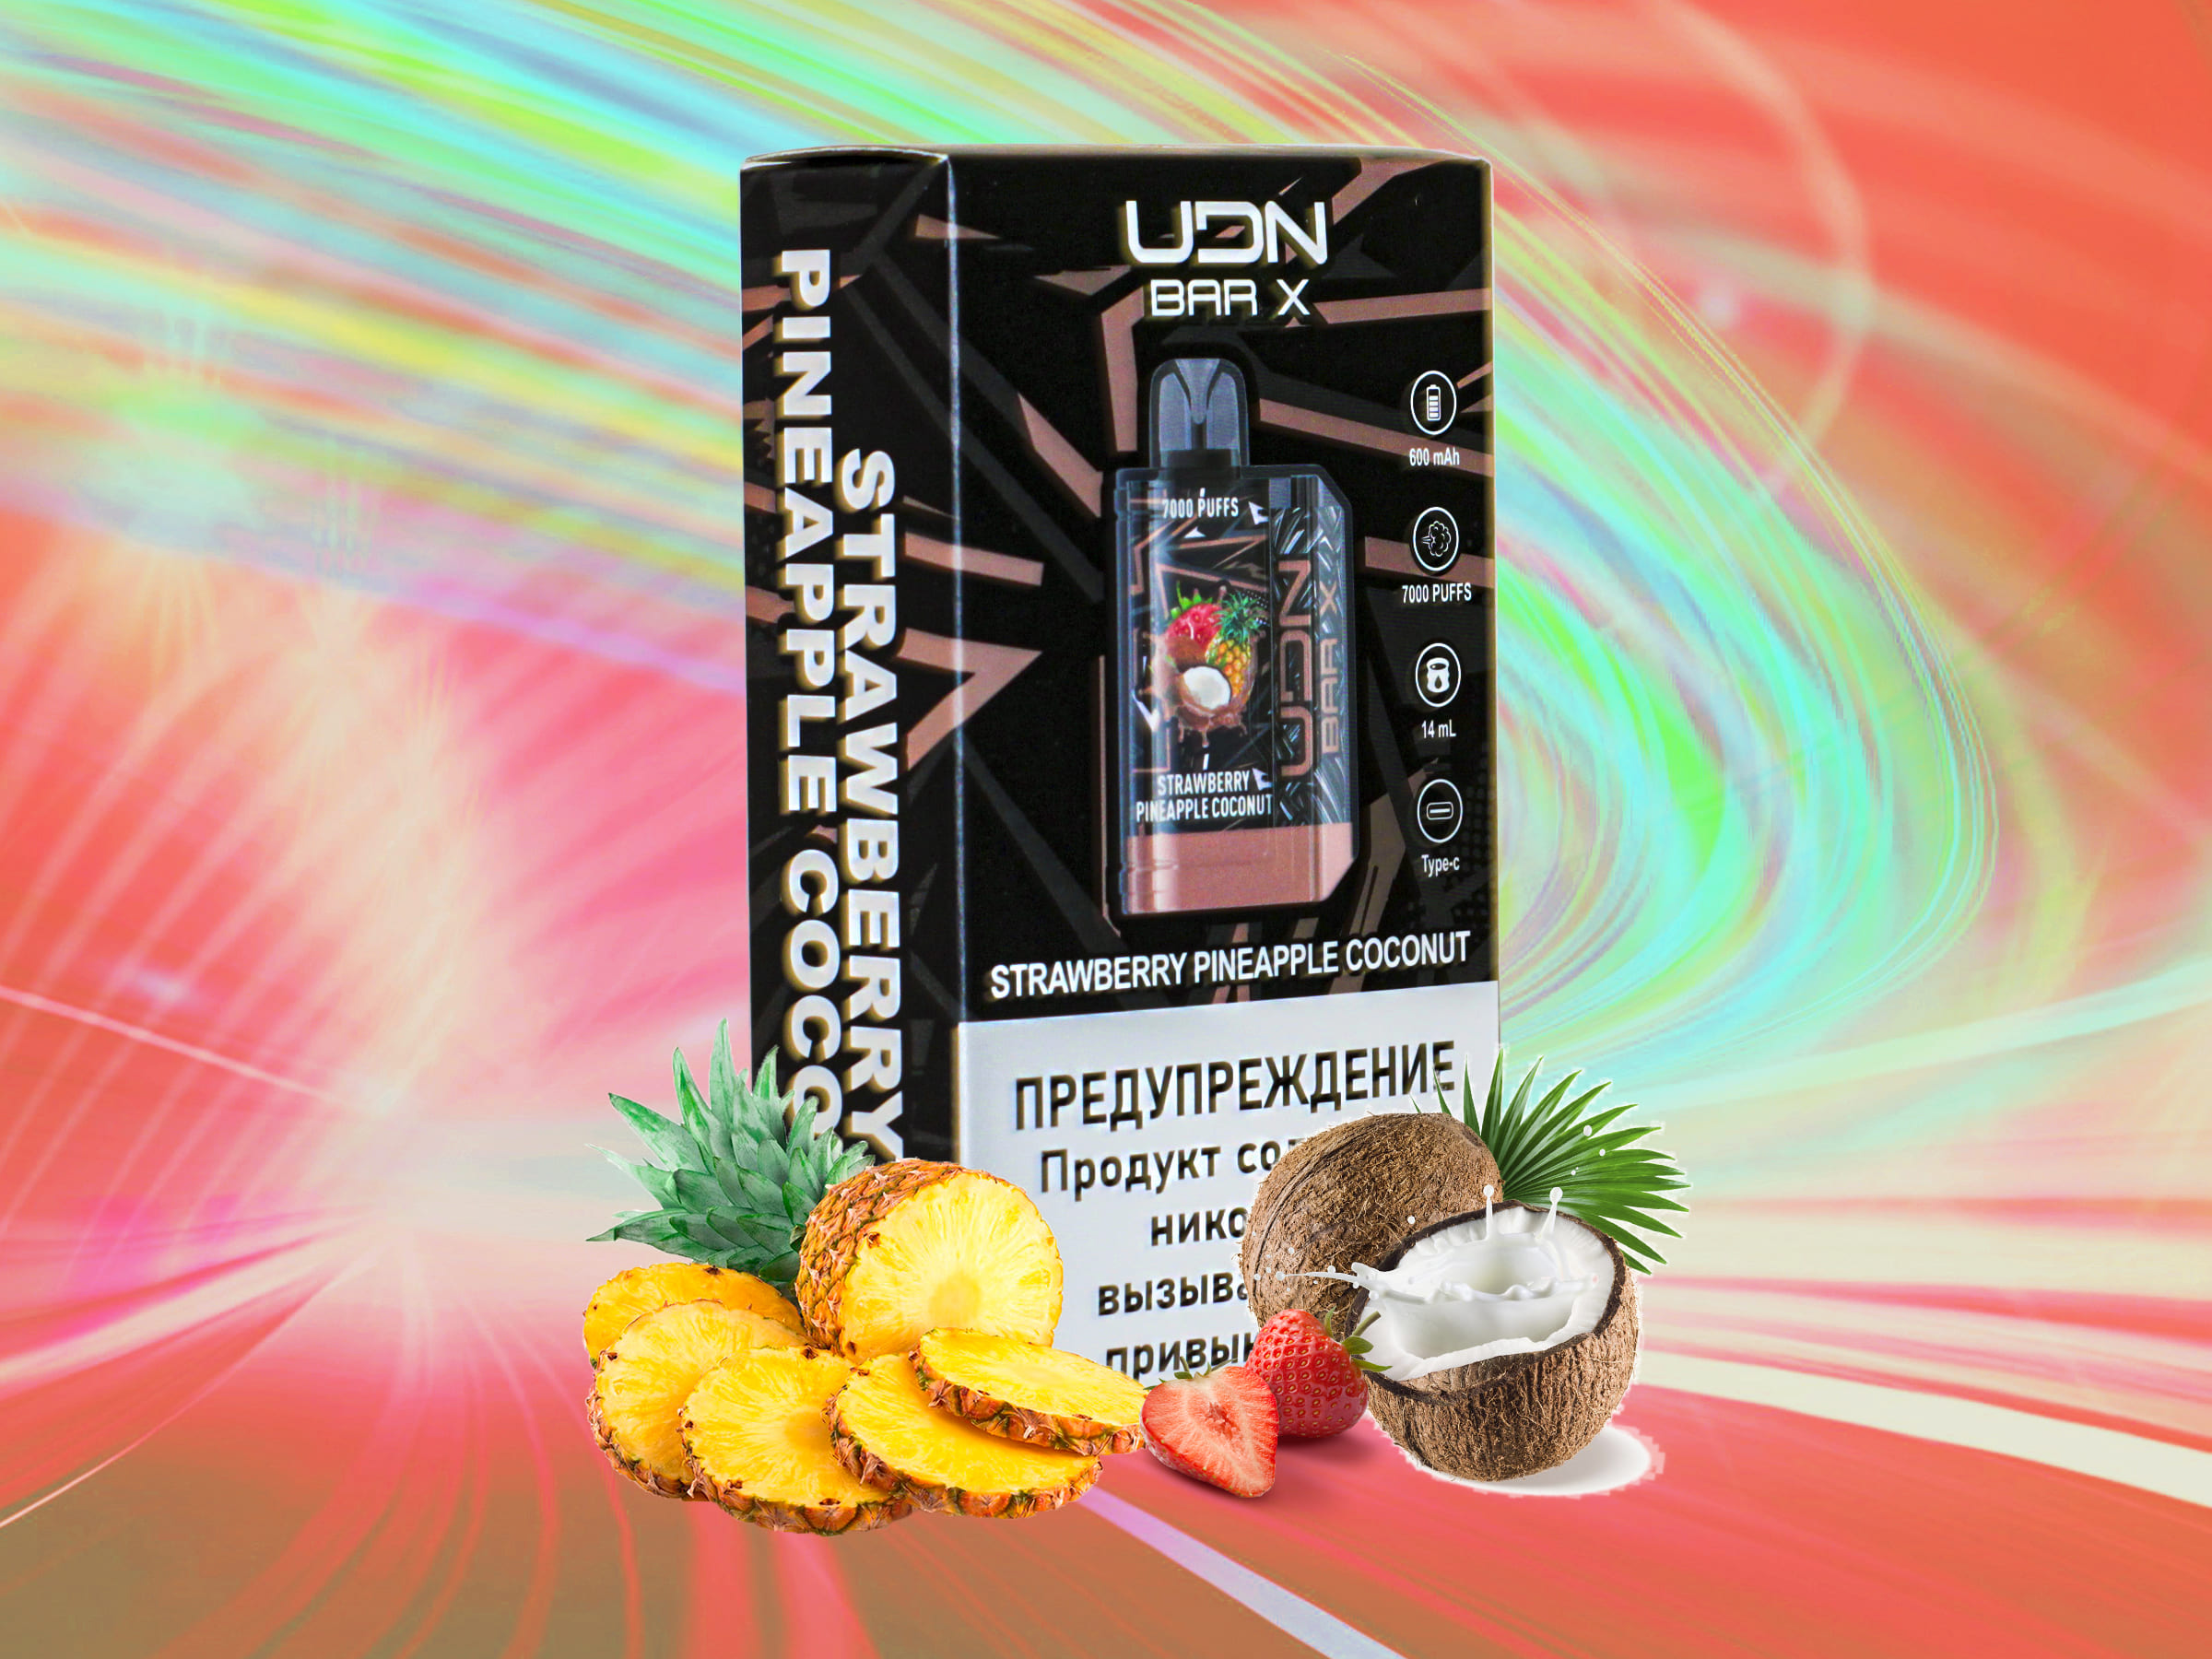 UDN X V3 7000 / Strawberry Pineapple Coconut